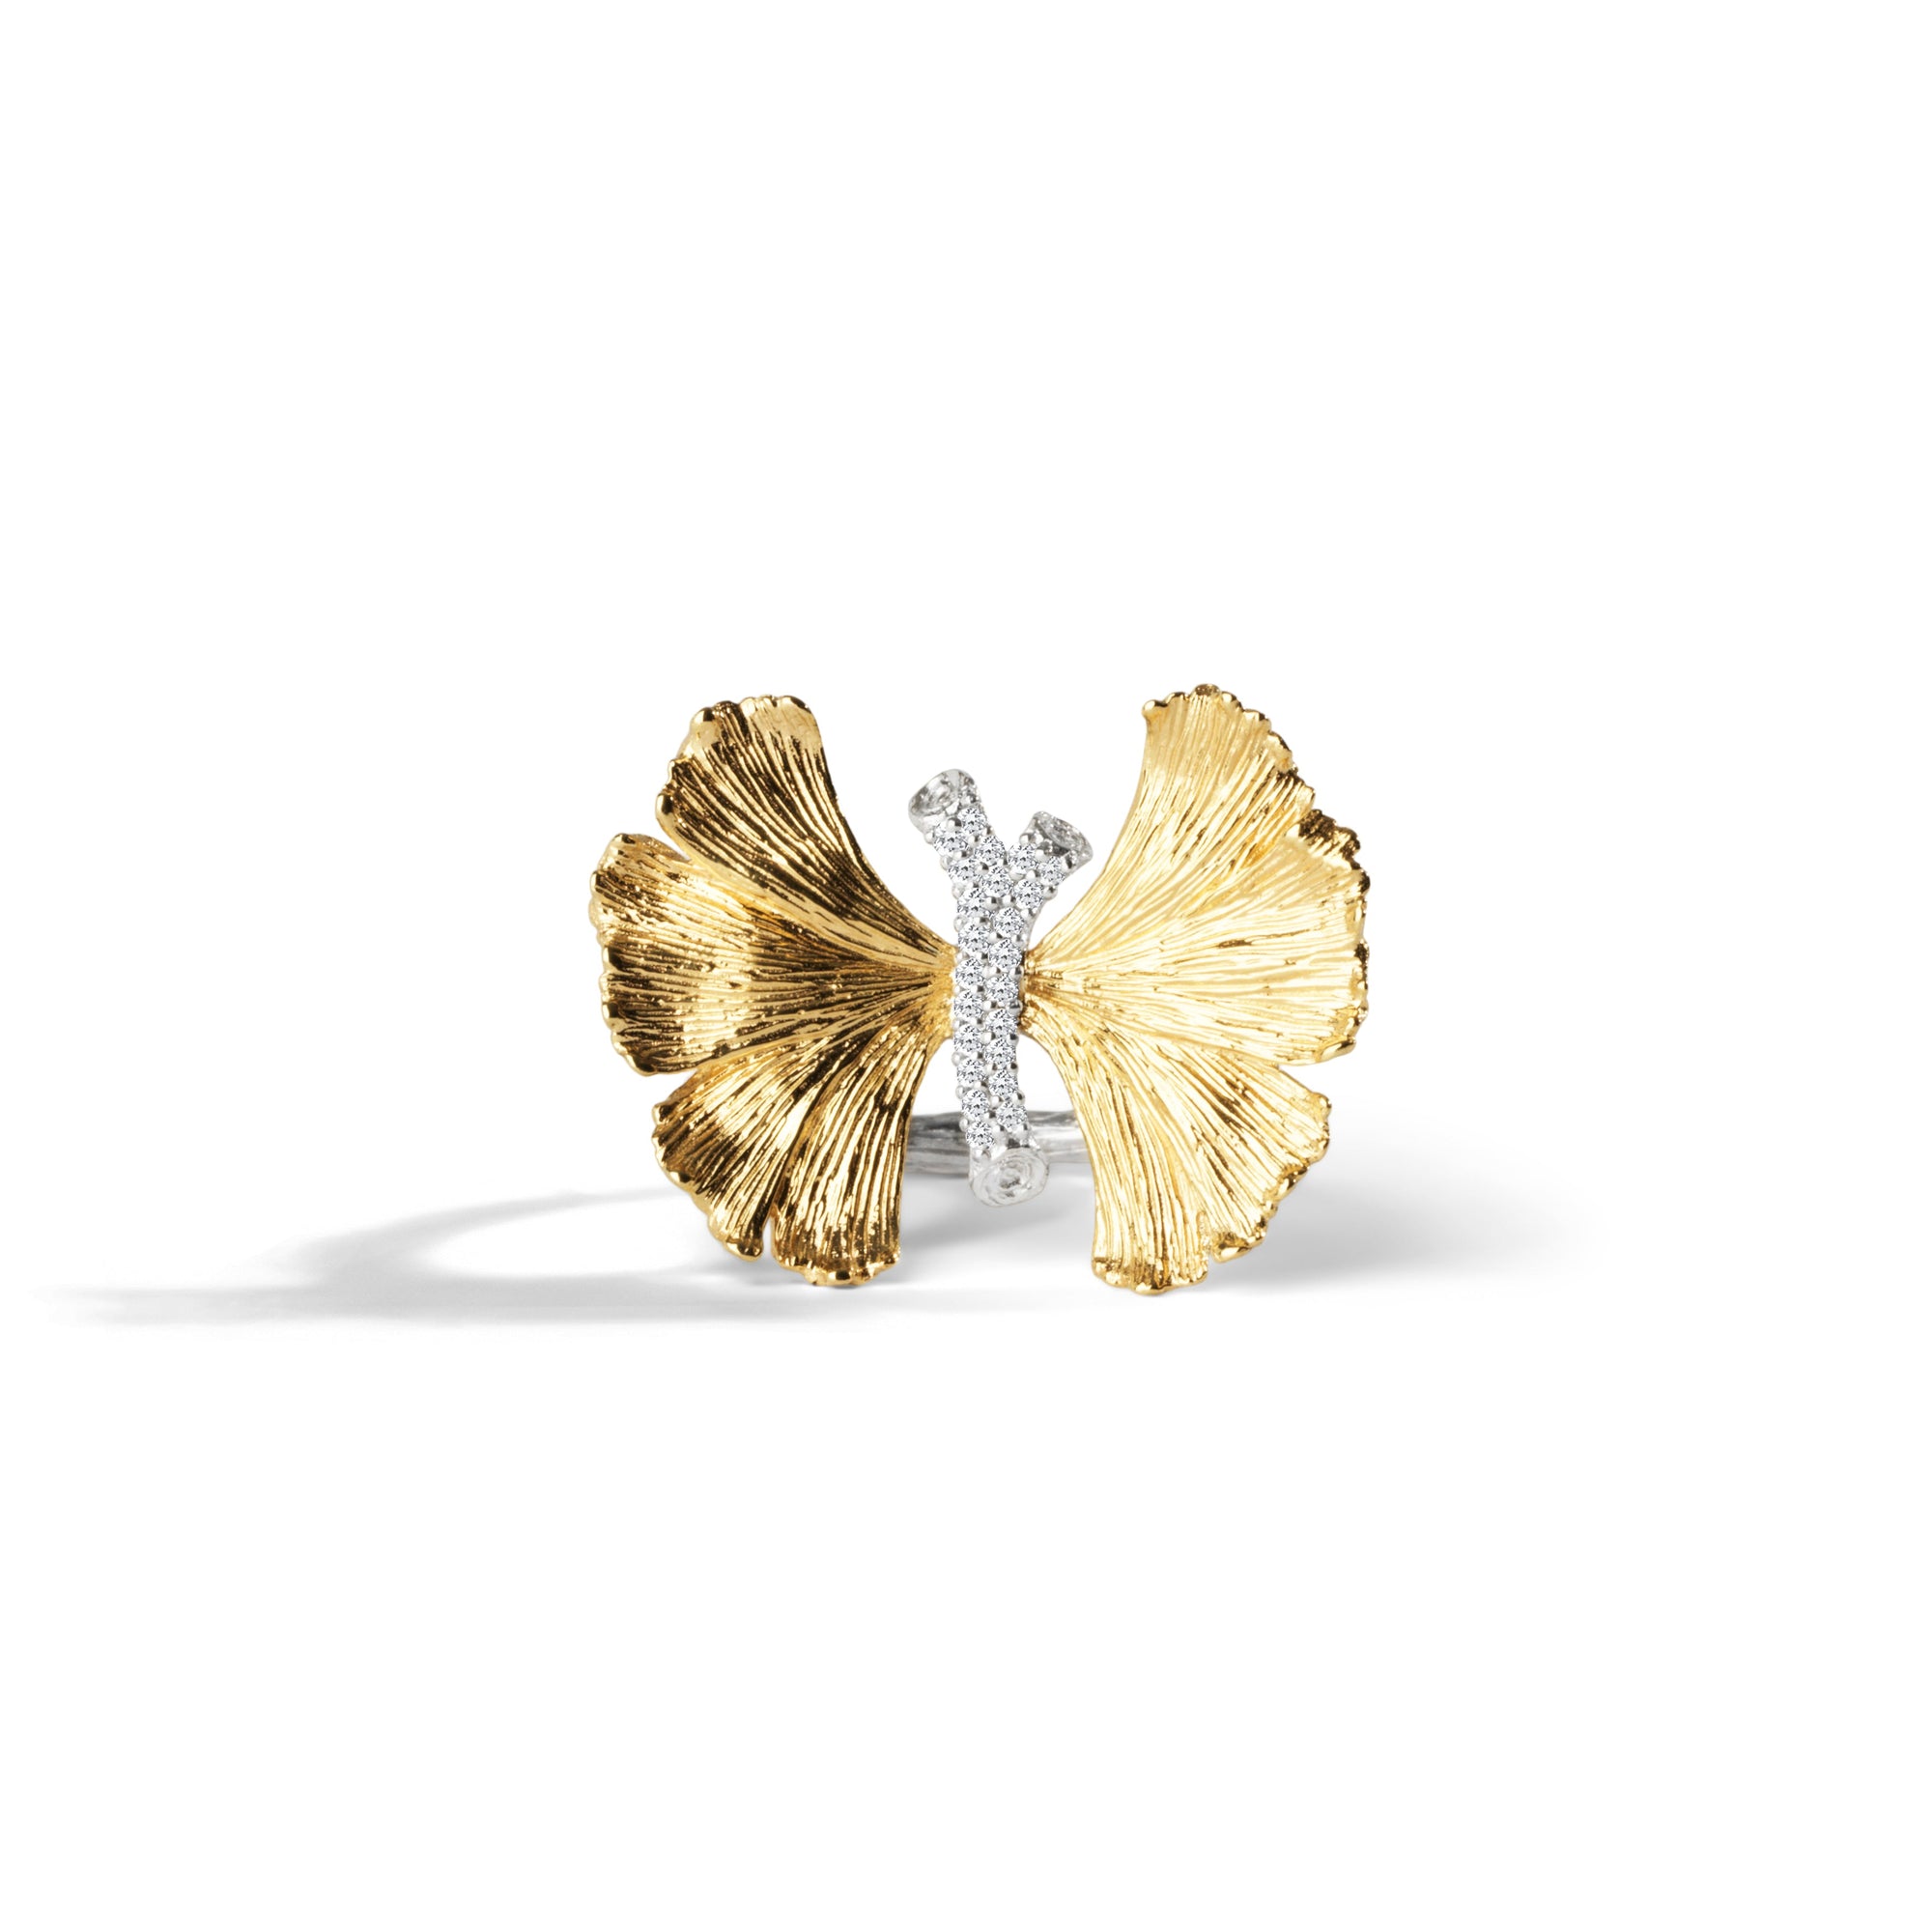 Michael Aram Butterfly Ginkgo Ring with Diamonds